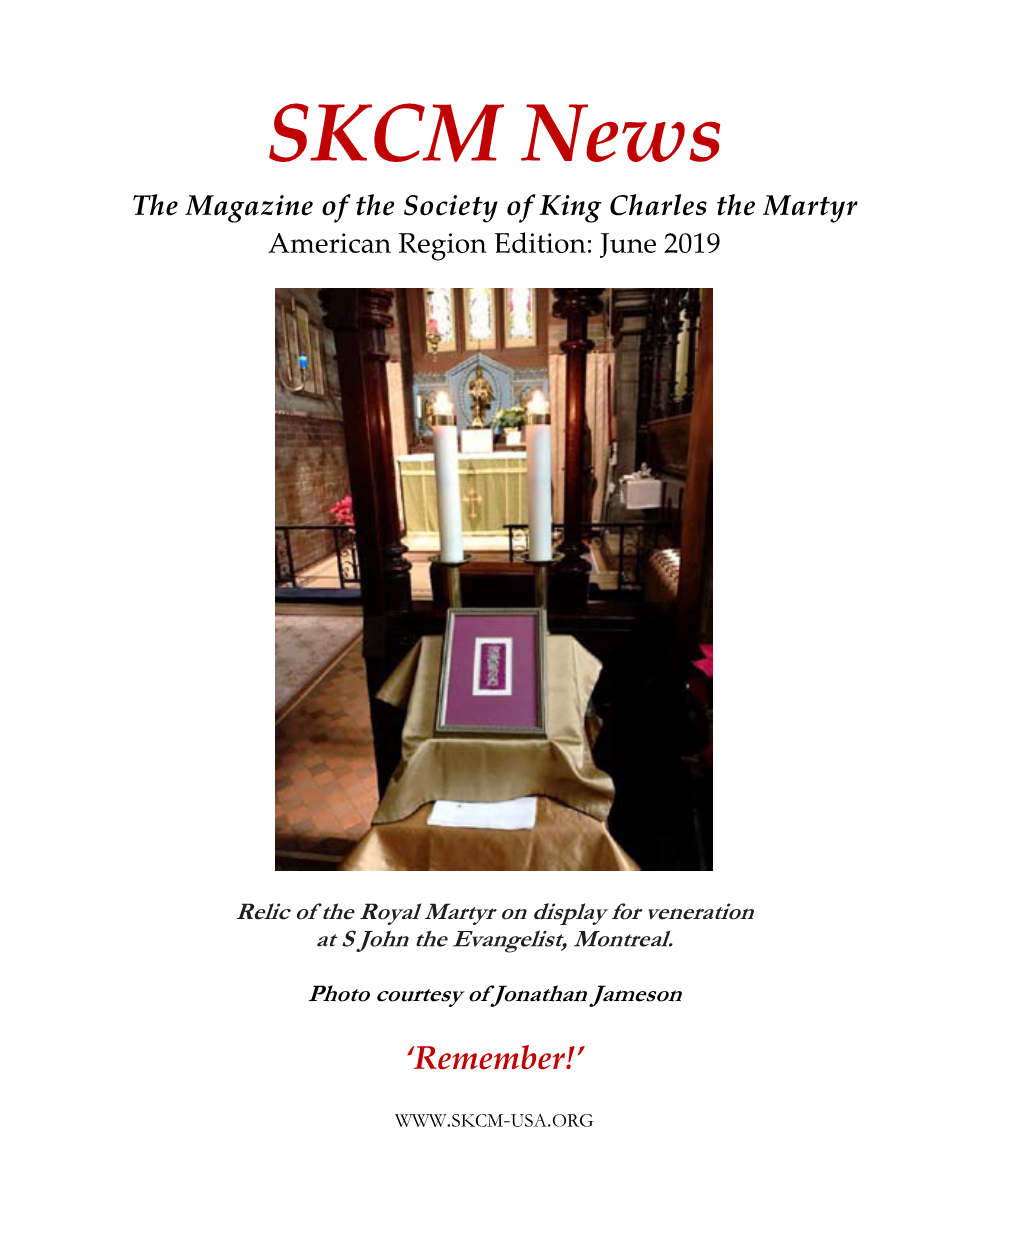 SKCM News the Magazine of the Society of King Charles the Martyr American Region Edition: June 2019